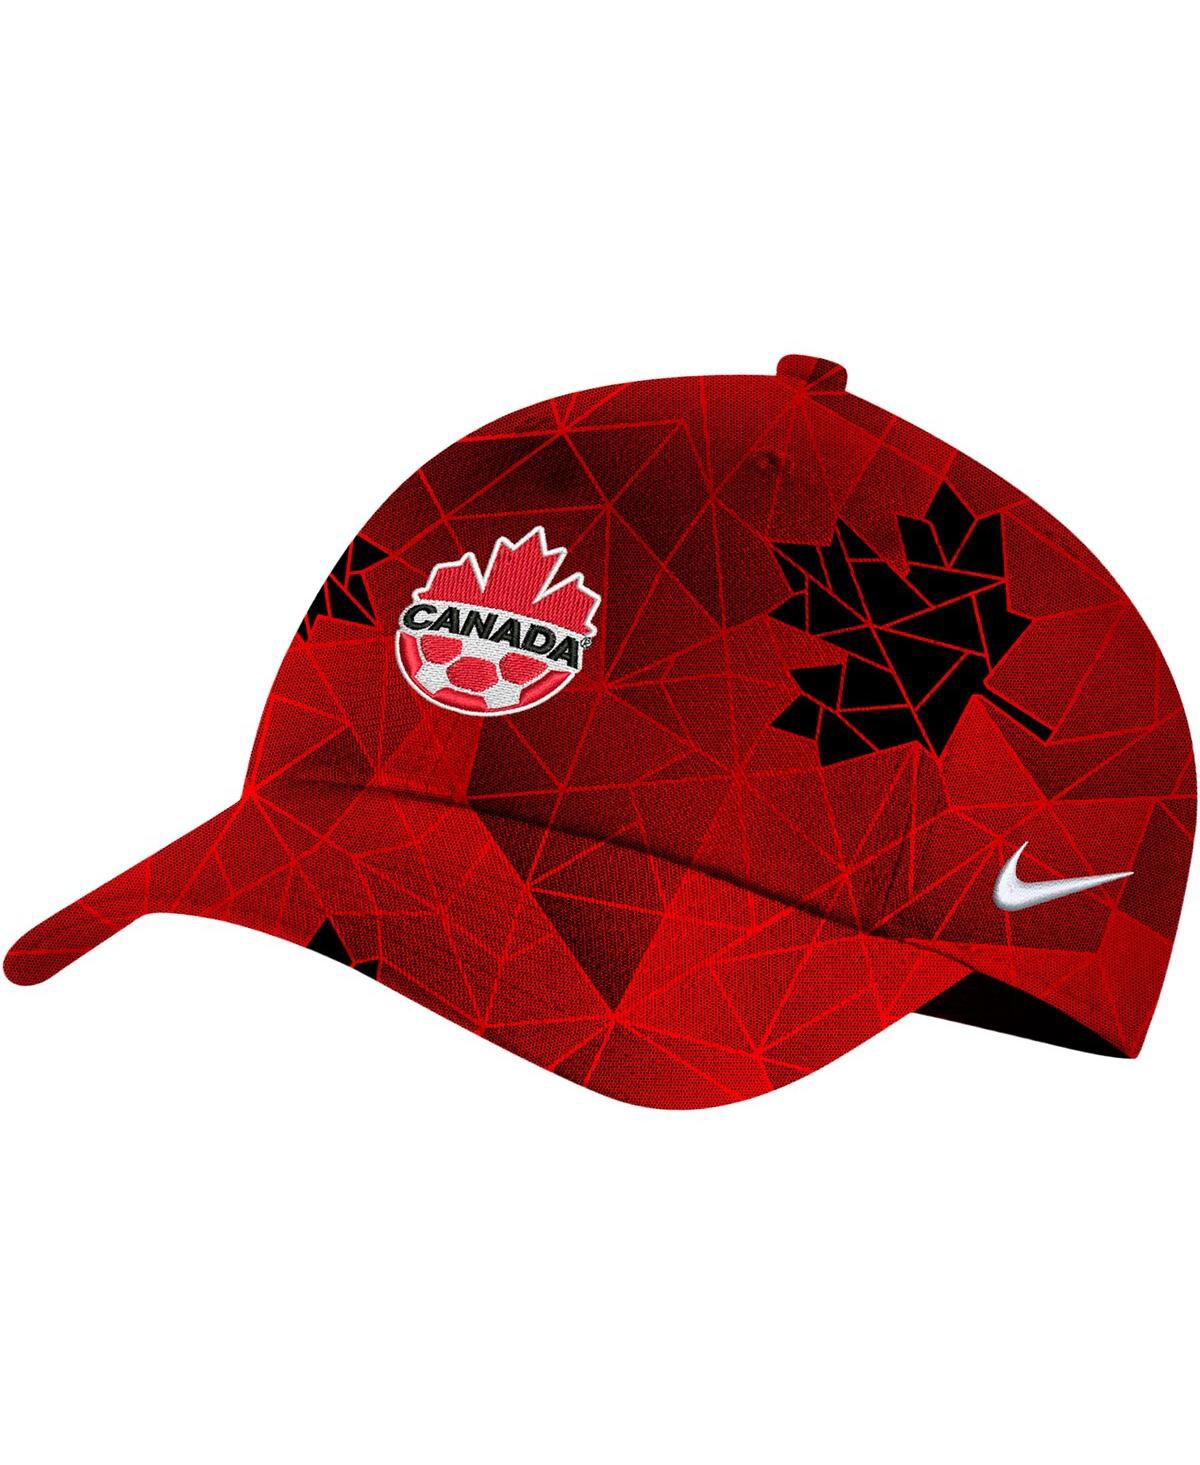 Nike Women's  Red Canada Soccer Campus Adjustable Hat